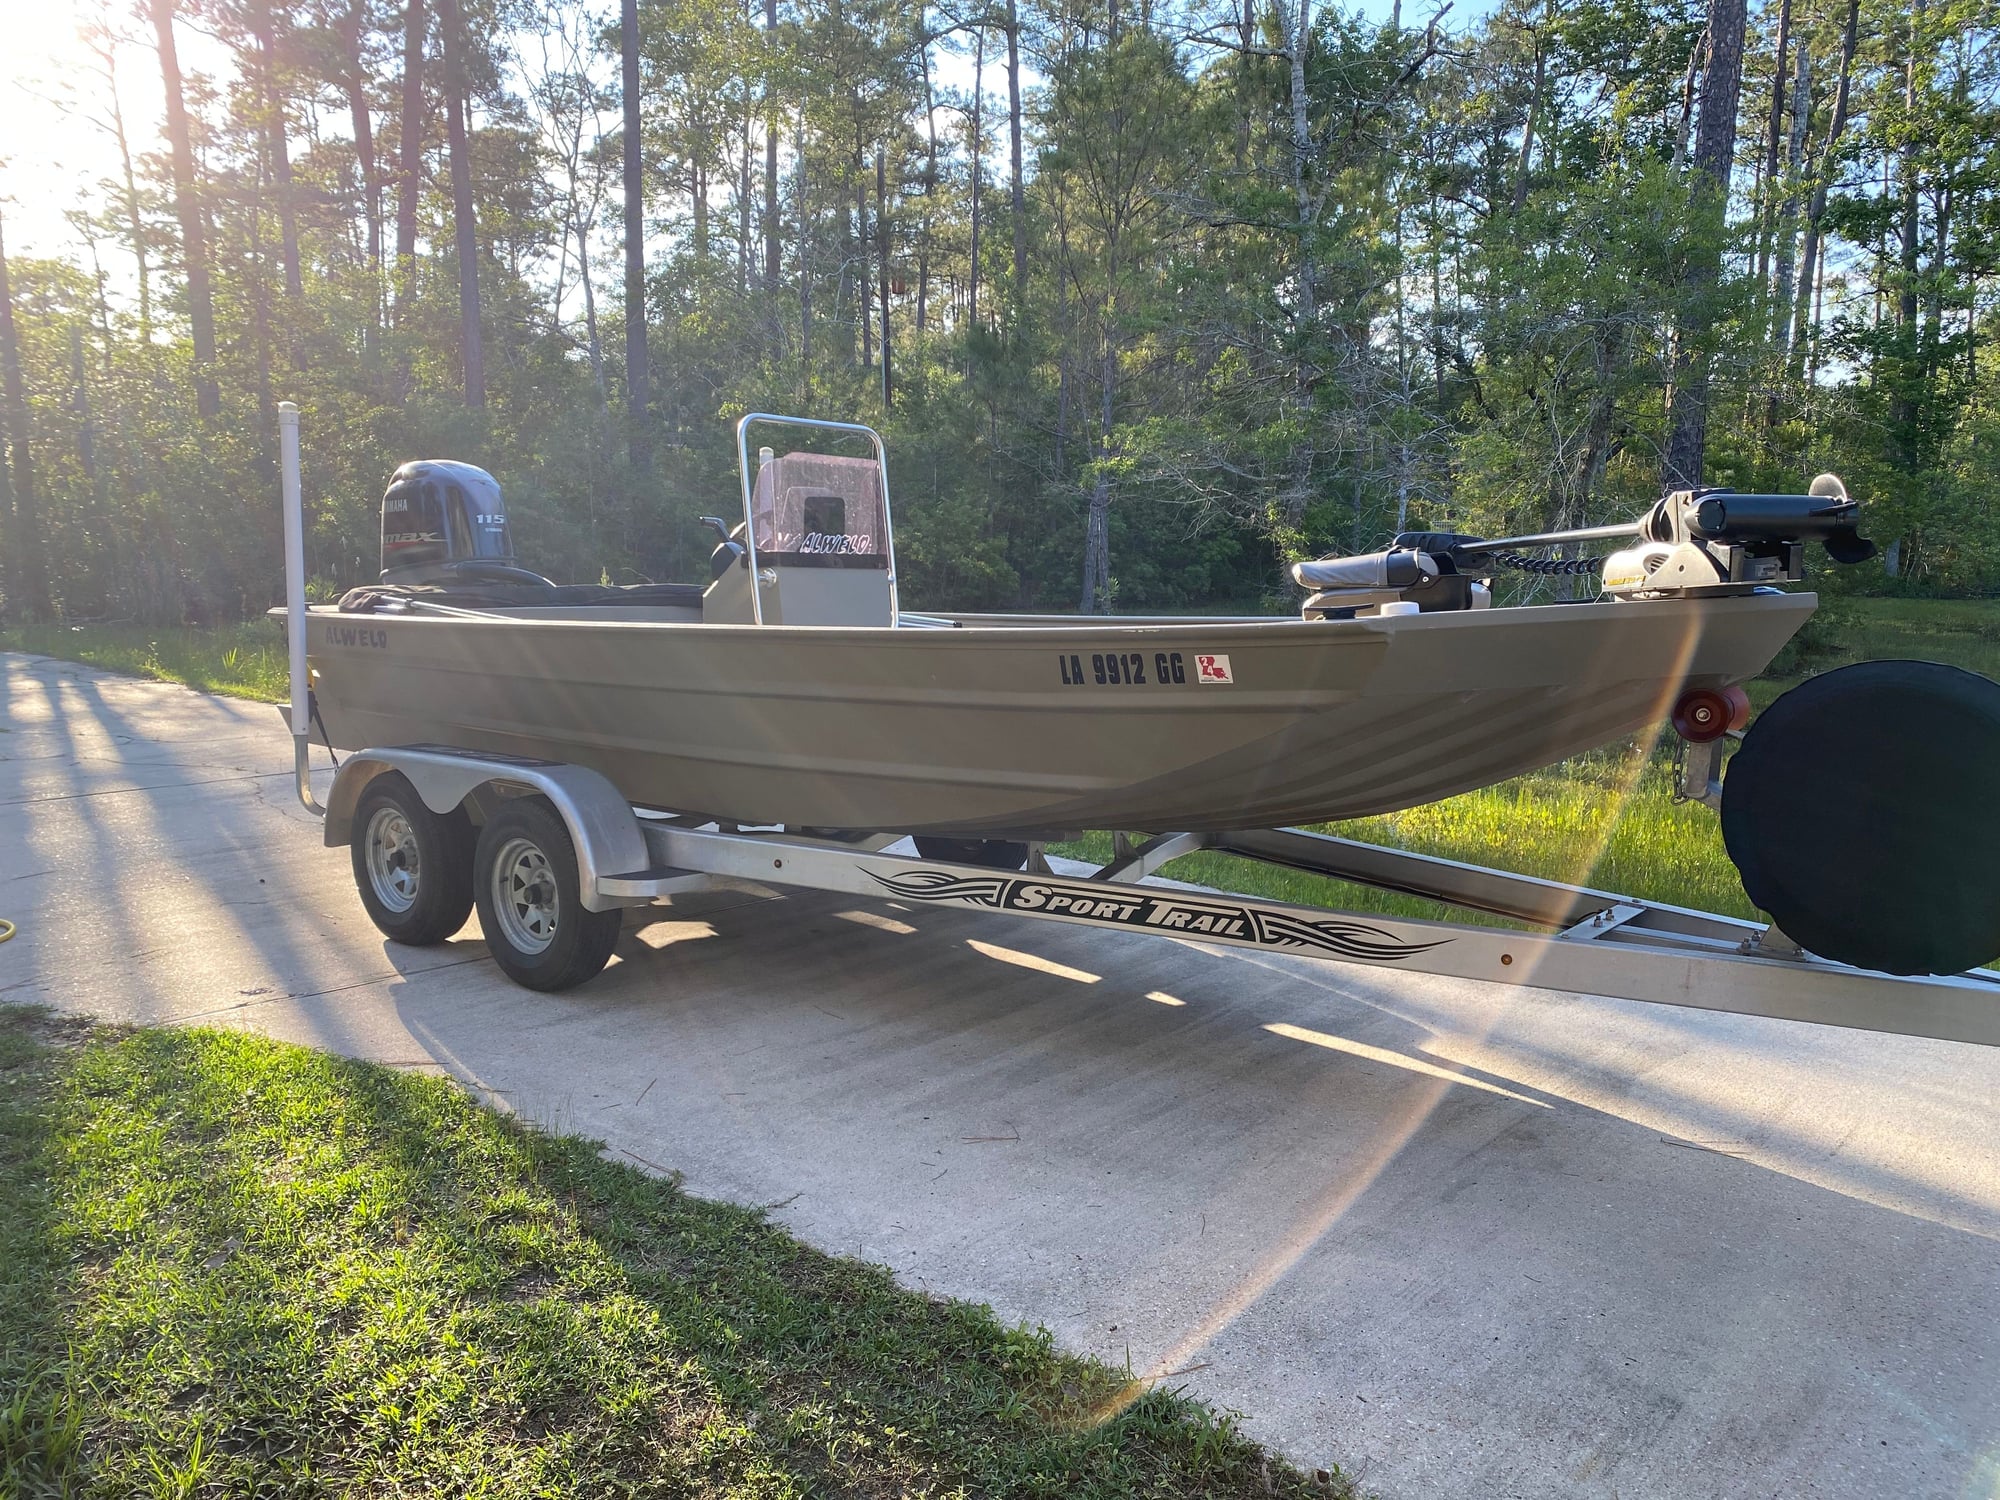 2017 ALWELD 1860 cc 115 sho - The Hull Truth - Boating and Fishing Forum